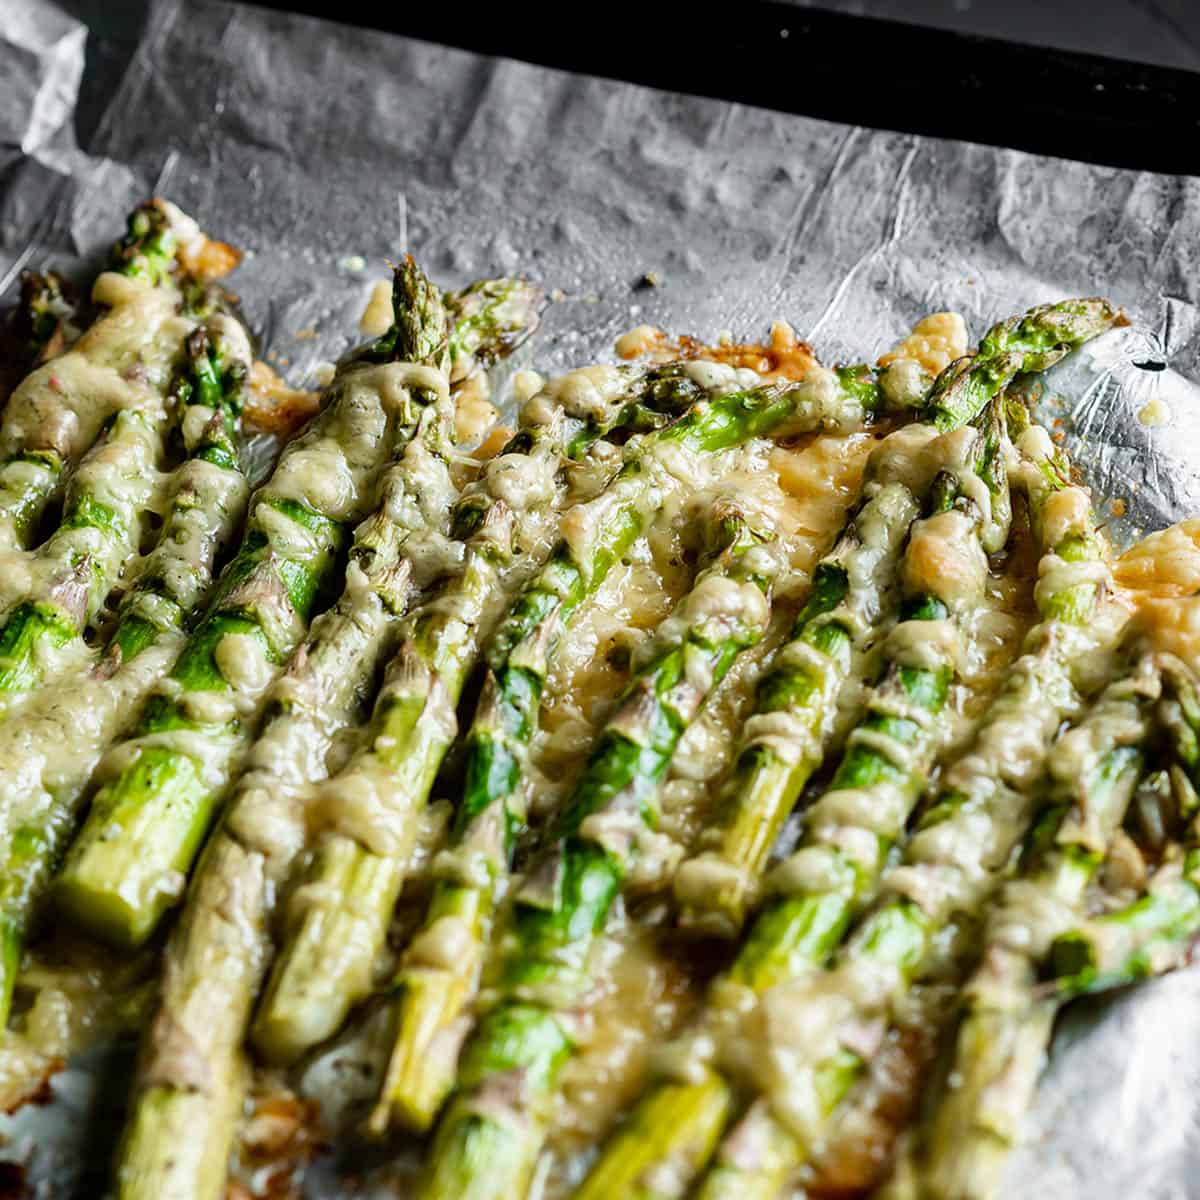 Asparagus in oven with cheese on top